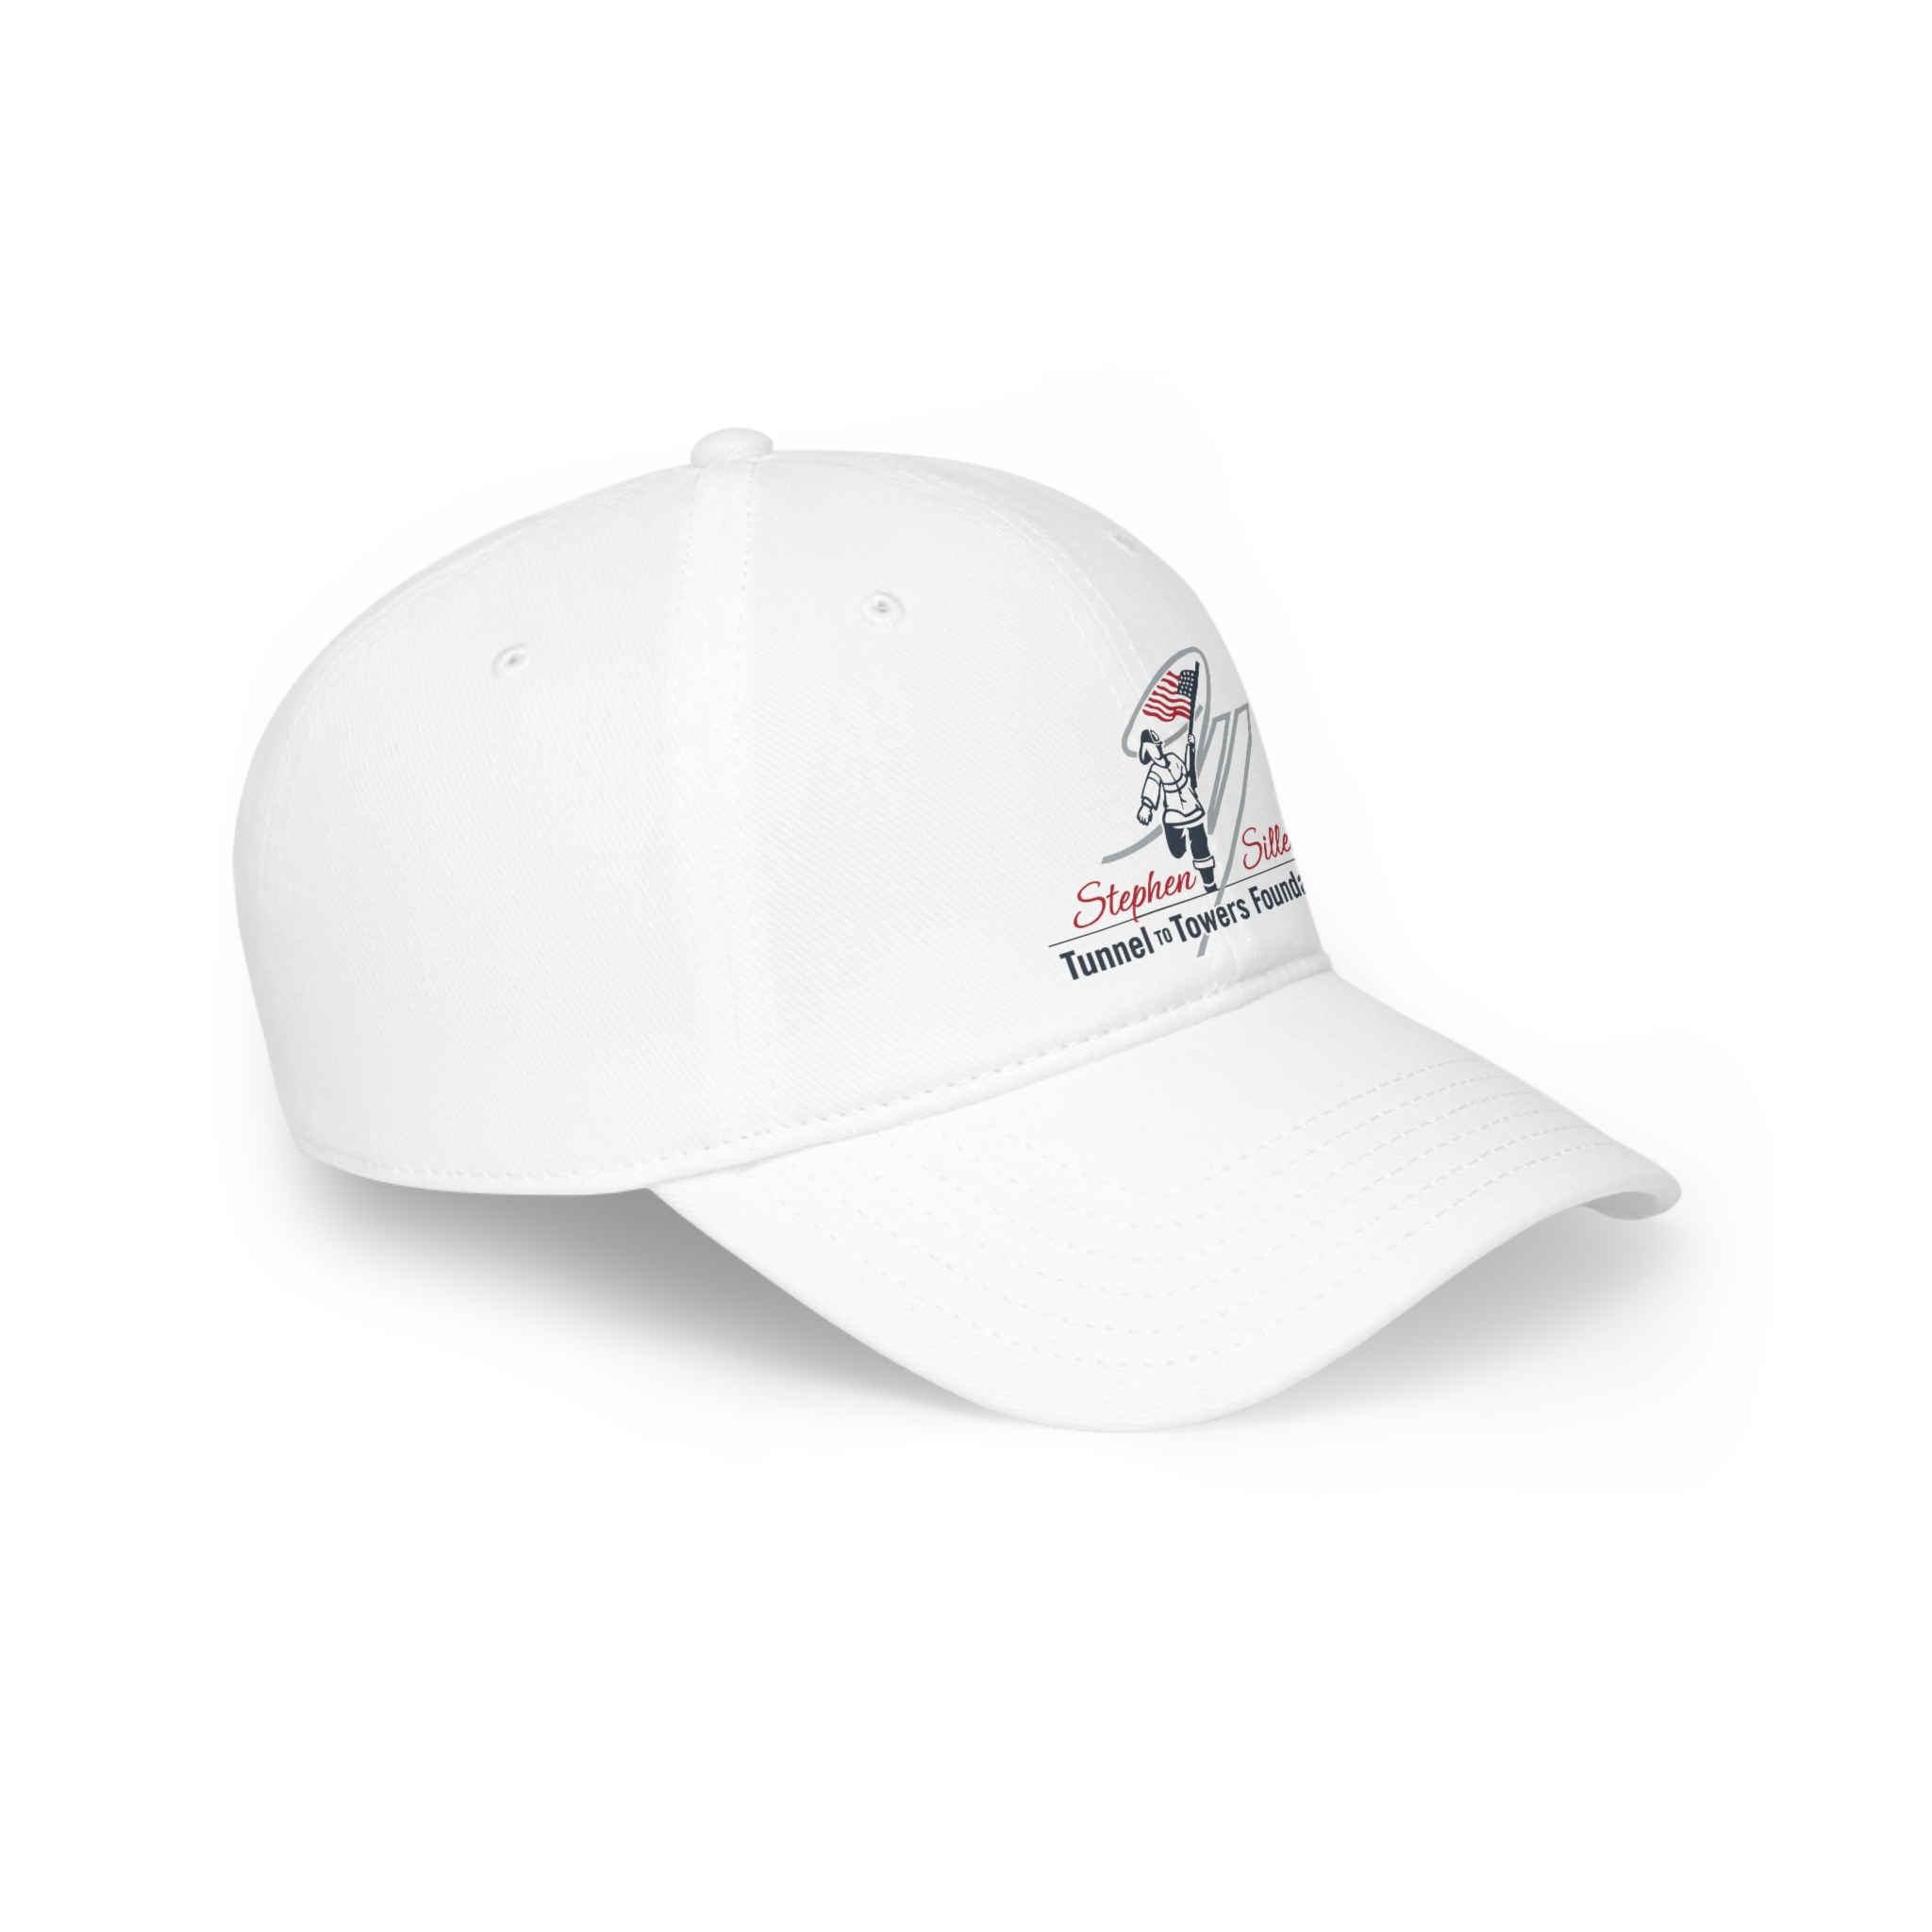 Buy Stephen Siller Tunnel To Towers Foundation Cap ⋆ NEXTSHIRT